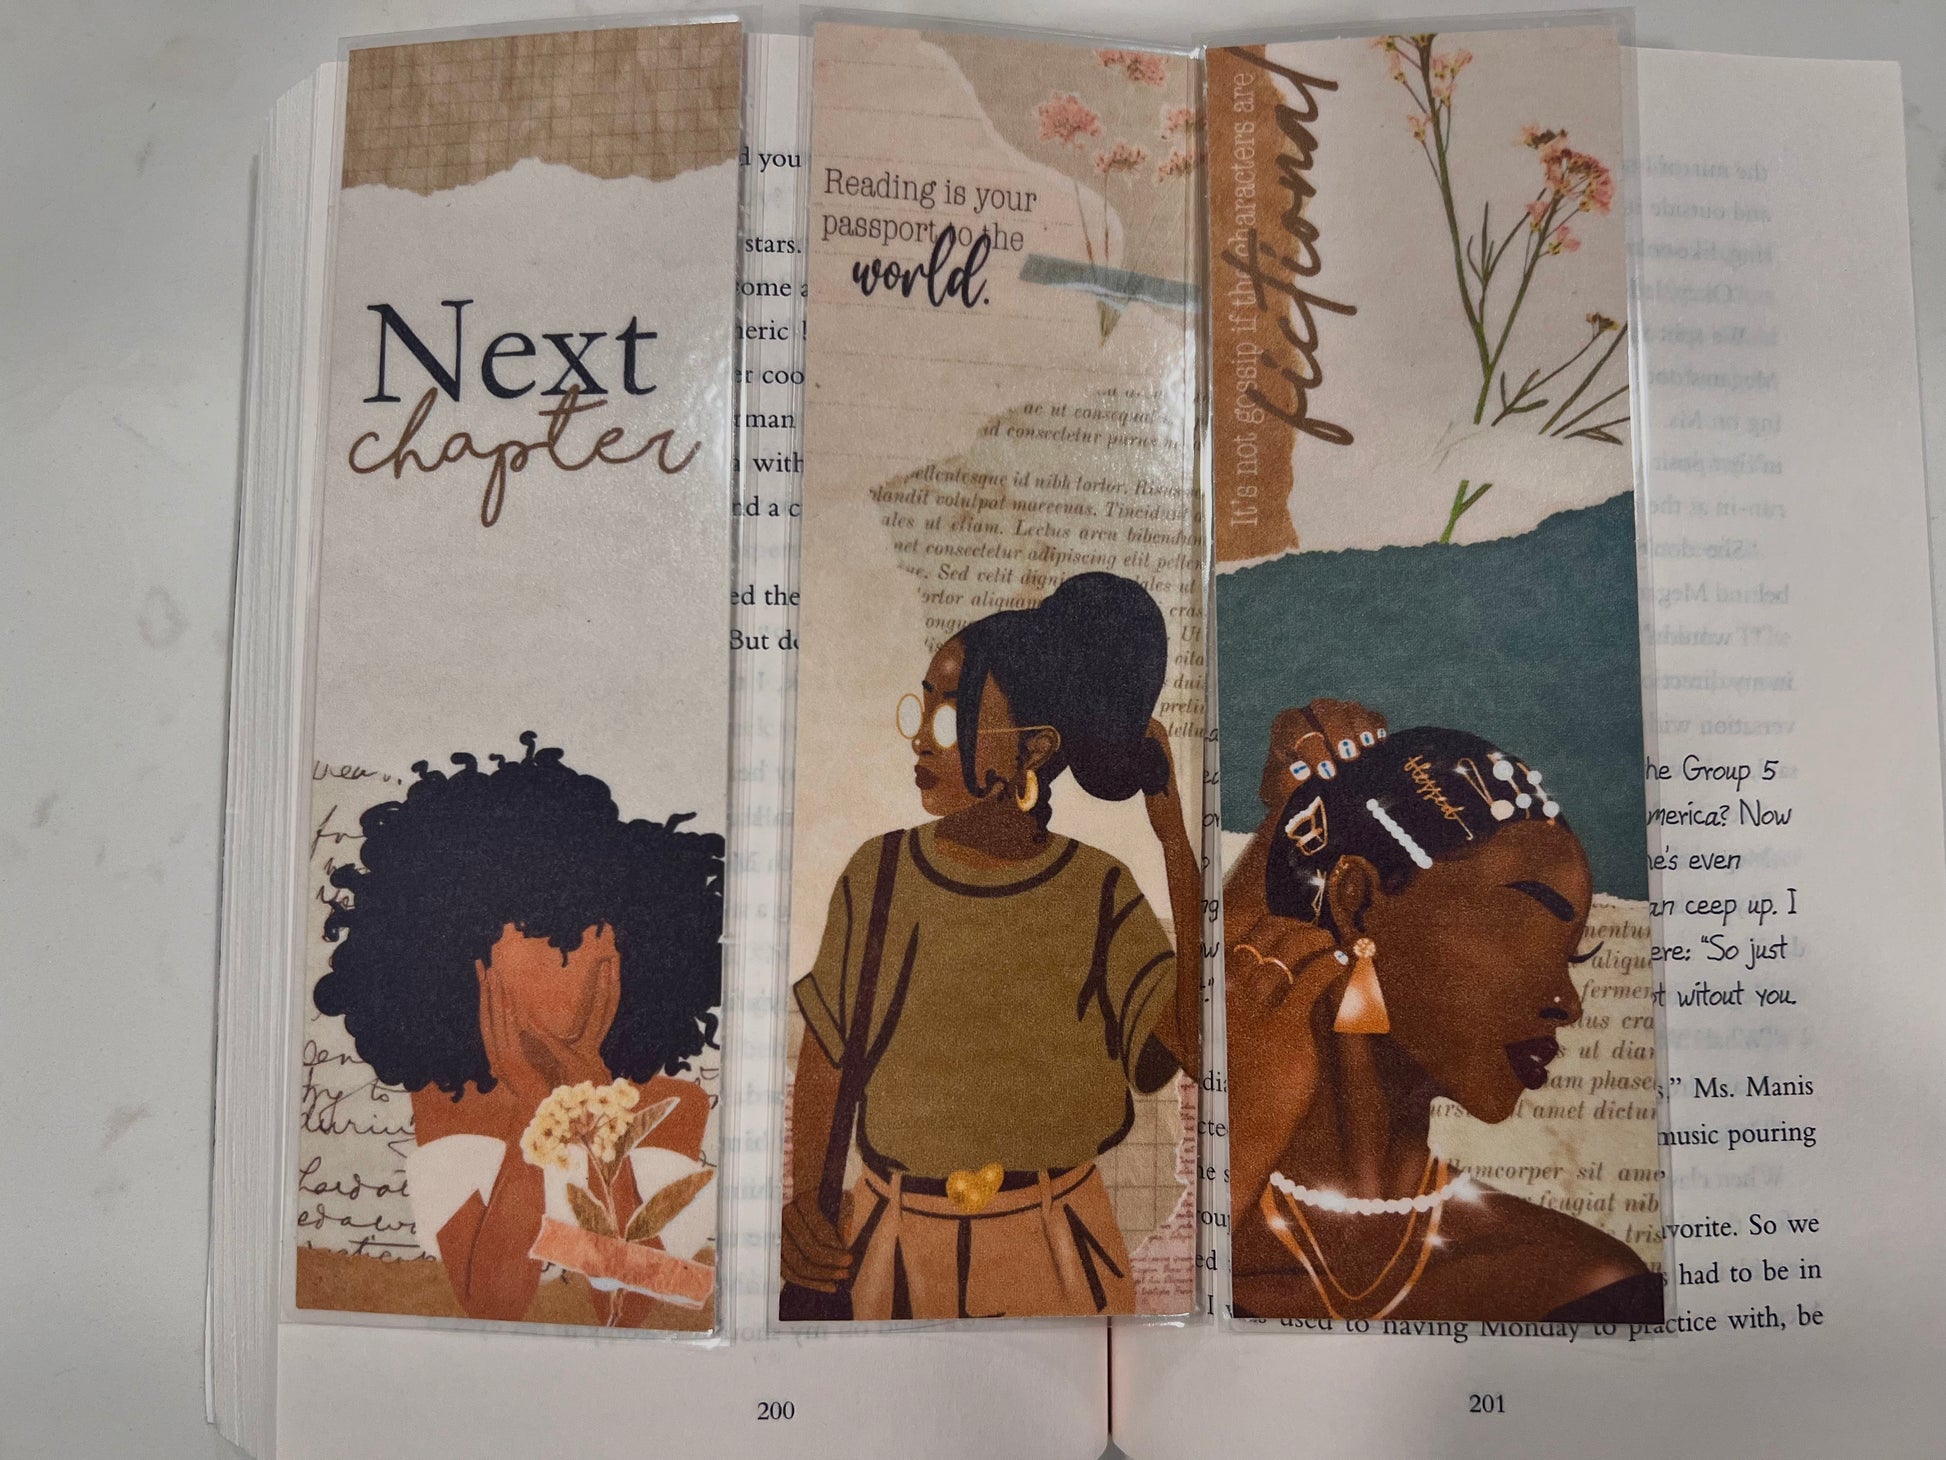 bookmarks featuring  vibrant and empowering illustration of a confident Black woman with flowing natural hair, adorned in bold colors and patterns